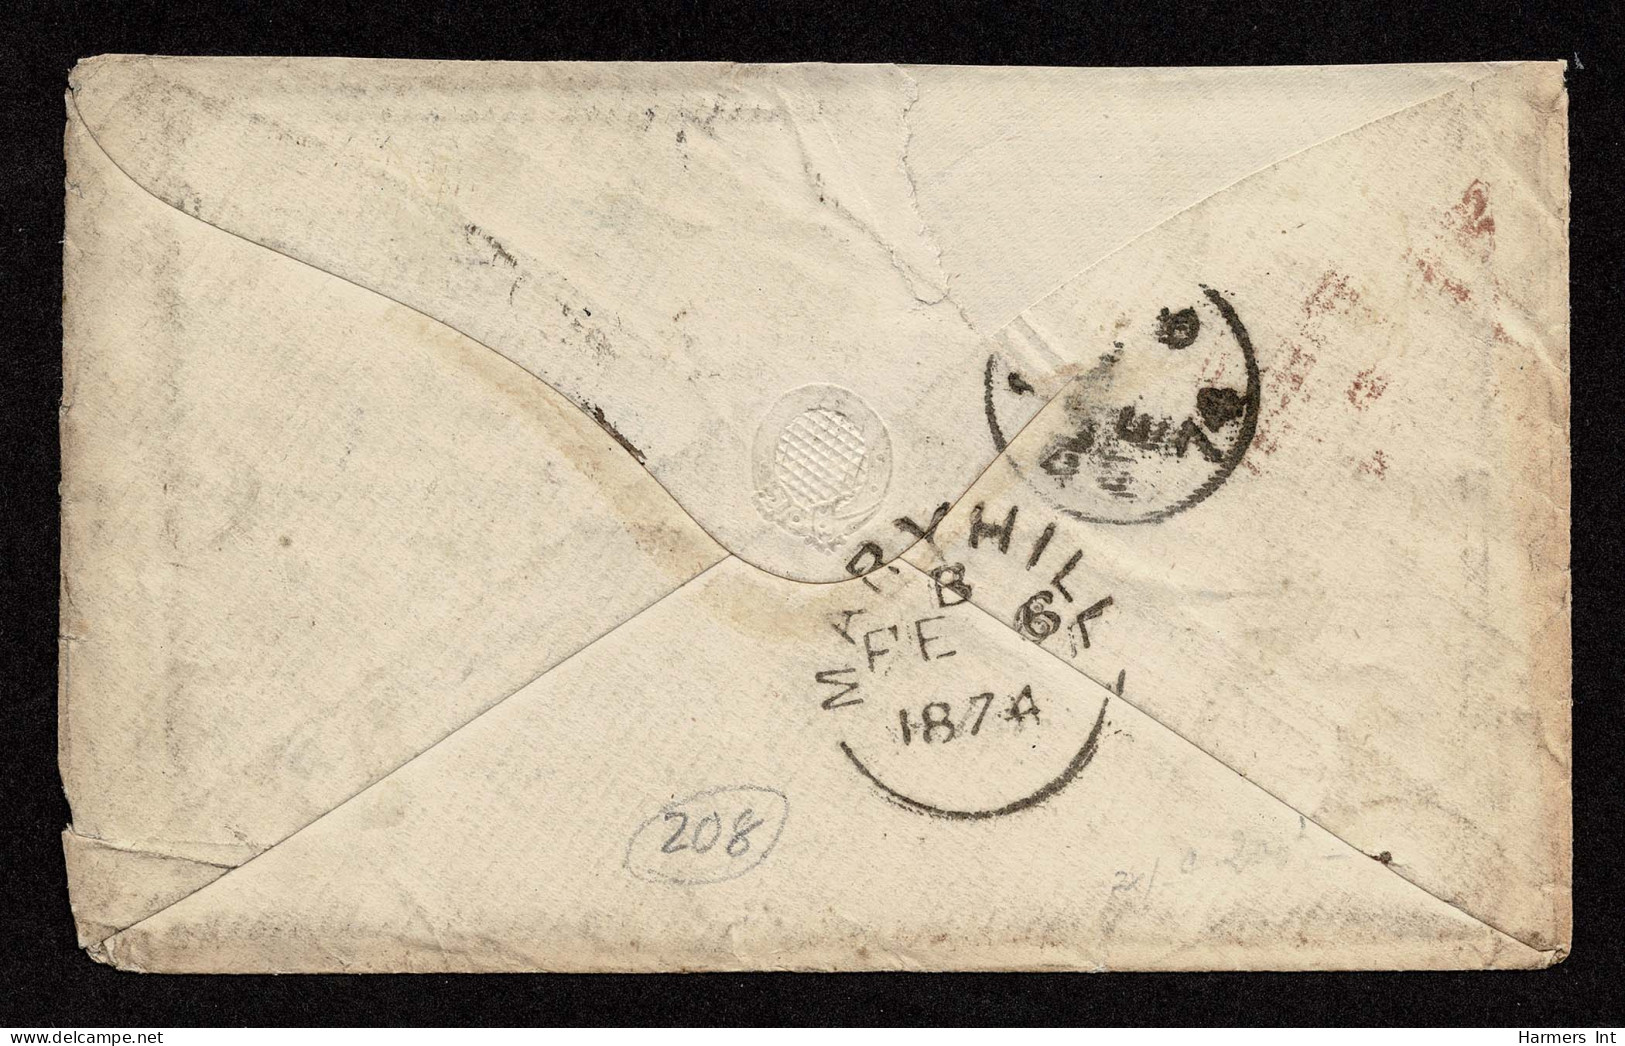 Lot # 529 Used To Scotland: 1873 (27 Dec.) Private Ship Double Rate Envelope From King Williams Town To Glasgow, Scotlan - Cape Of Good Hope (1853-1904)